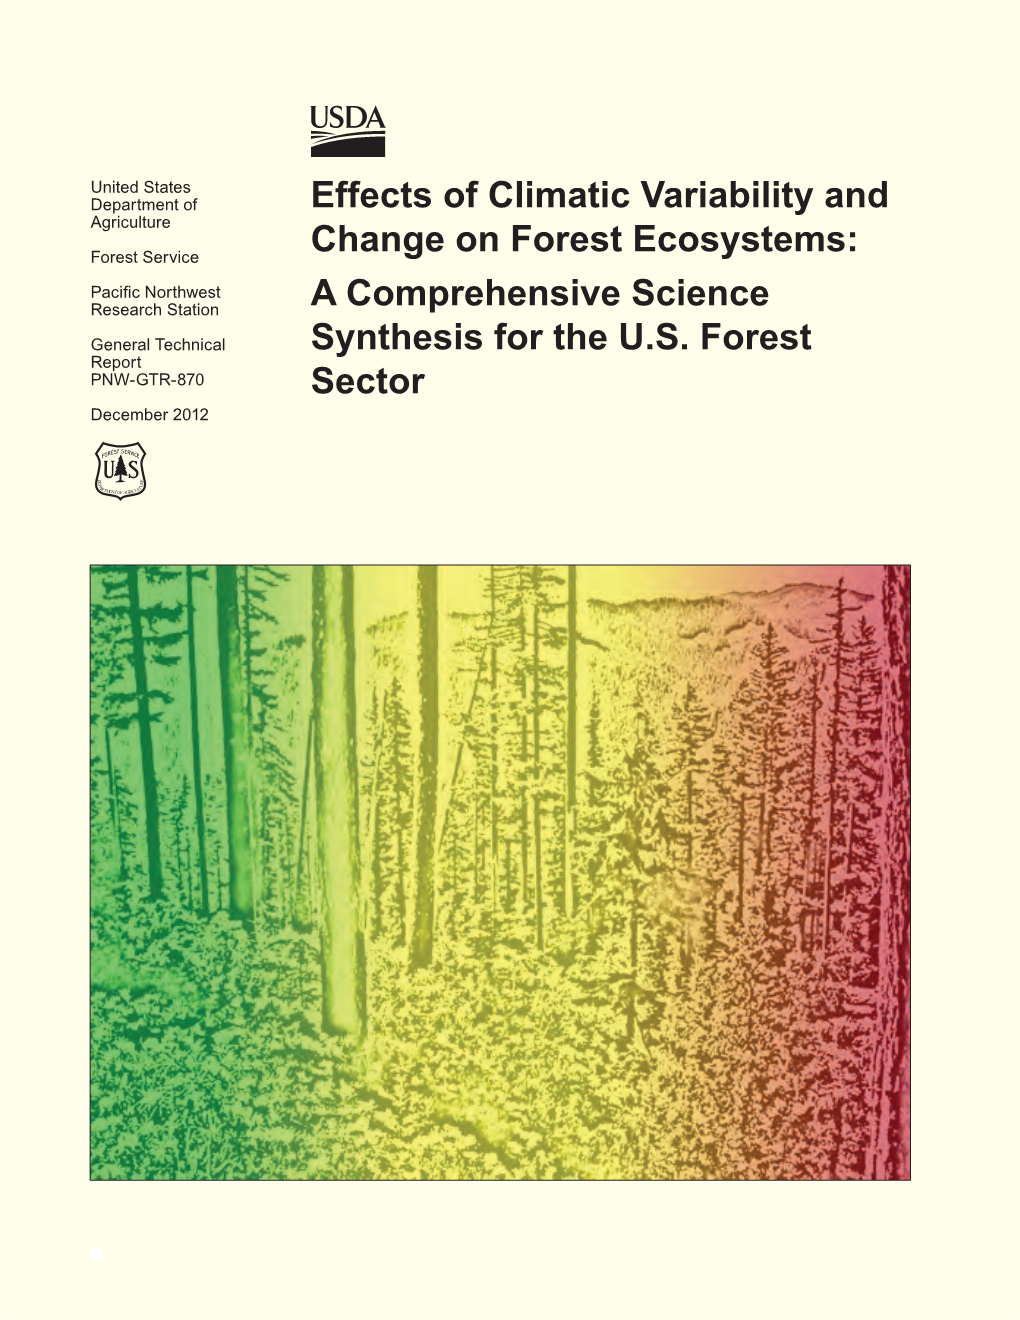 Effects of Climatic Variability and Change on Forest Ecosystems: a Comprehensive Science Synthesis for the U.S